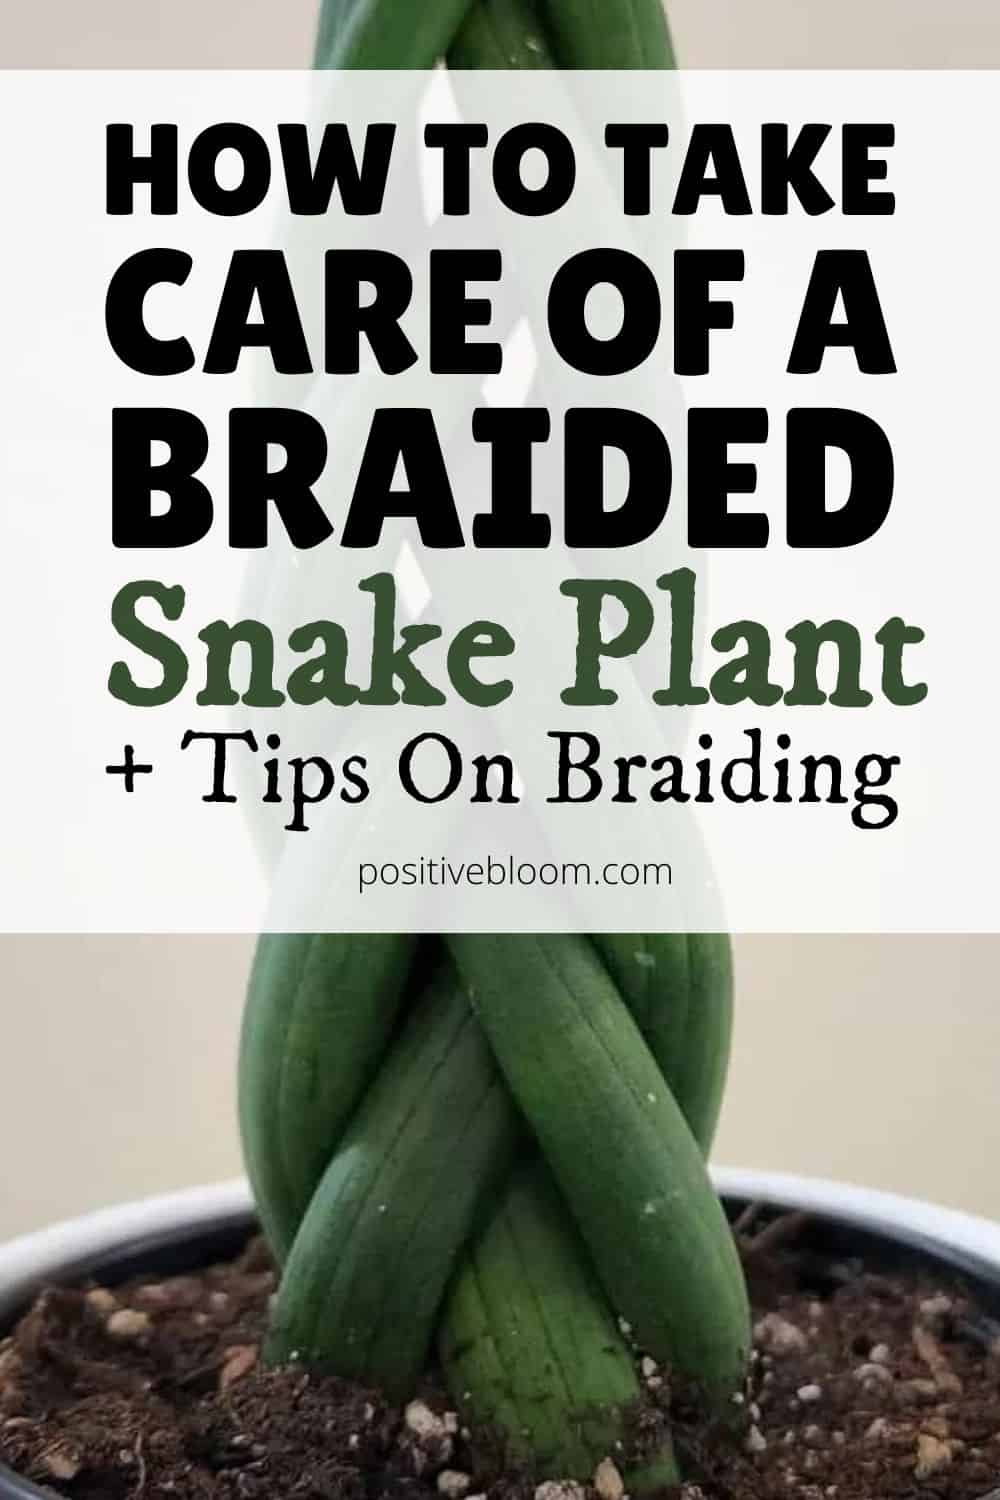 How To Take Care Of A Braided Snake Plant + Tips On Braiding Pinterest